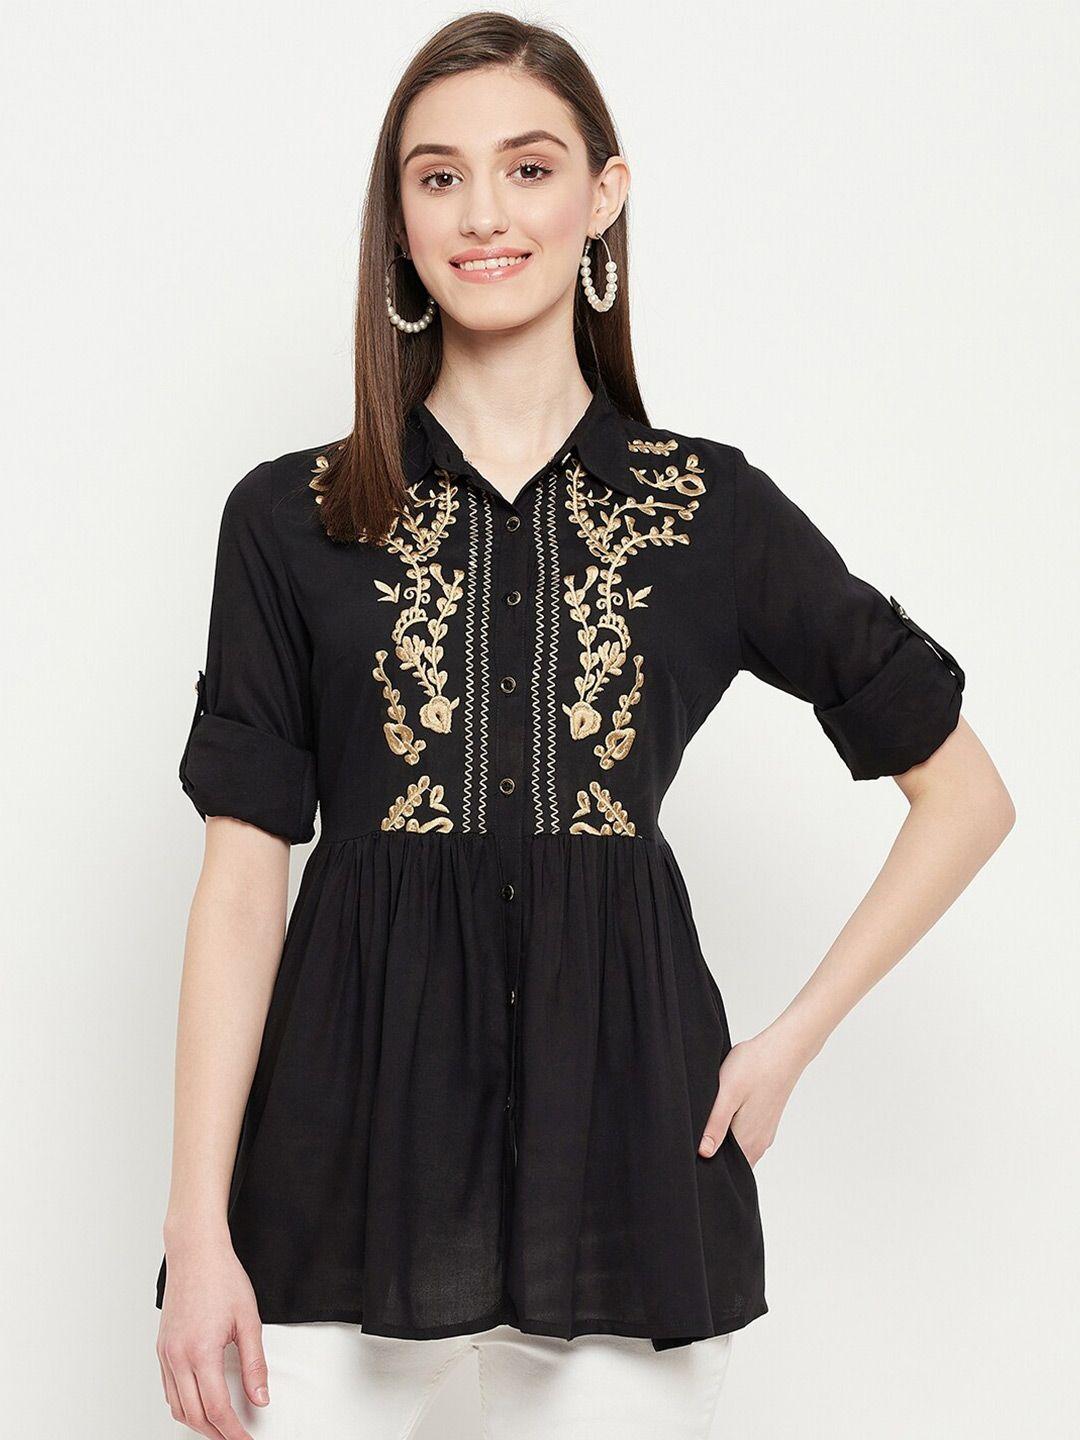 ruhaans  floral embroidered roll-up sleeves shirt style top